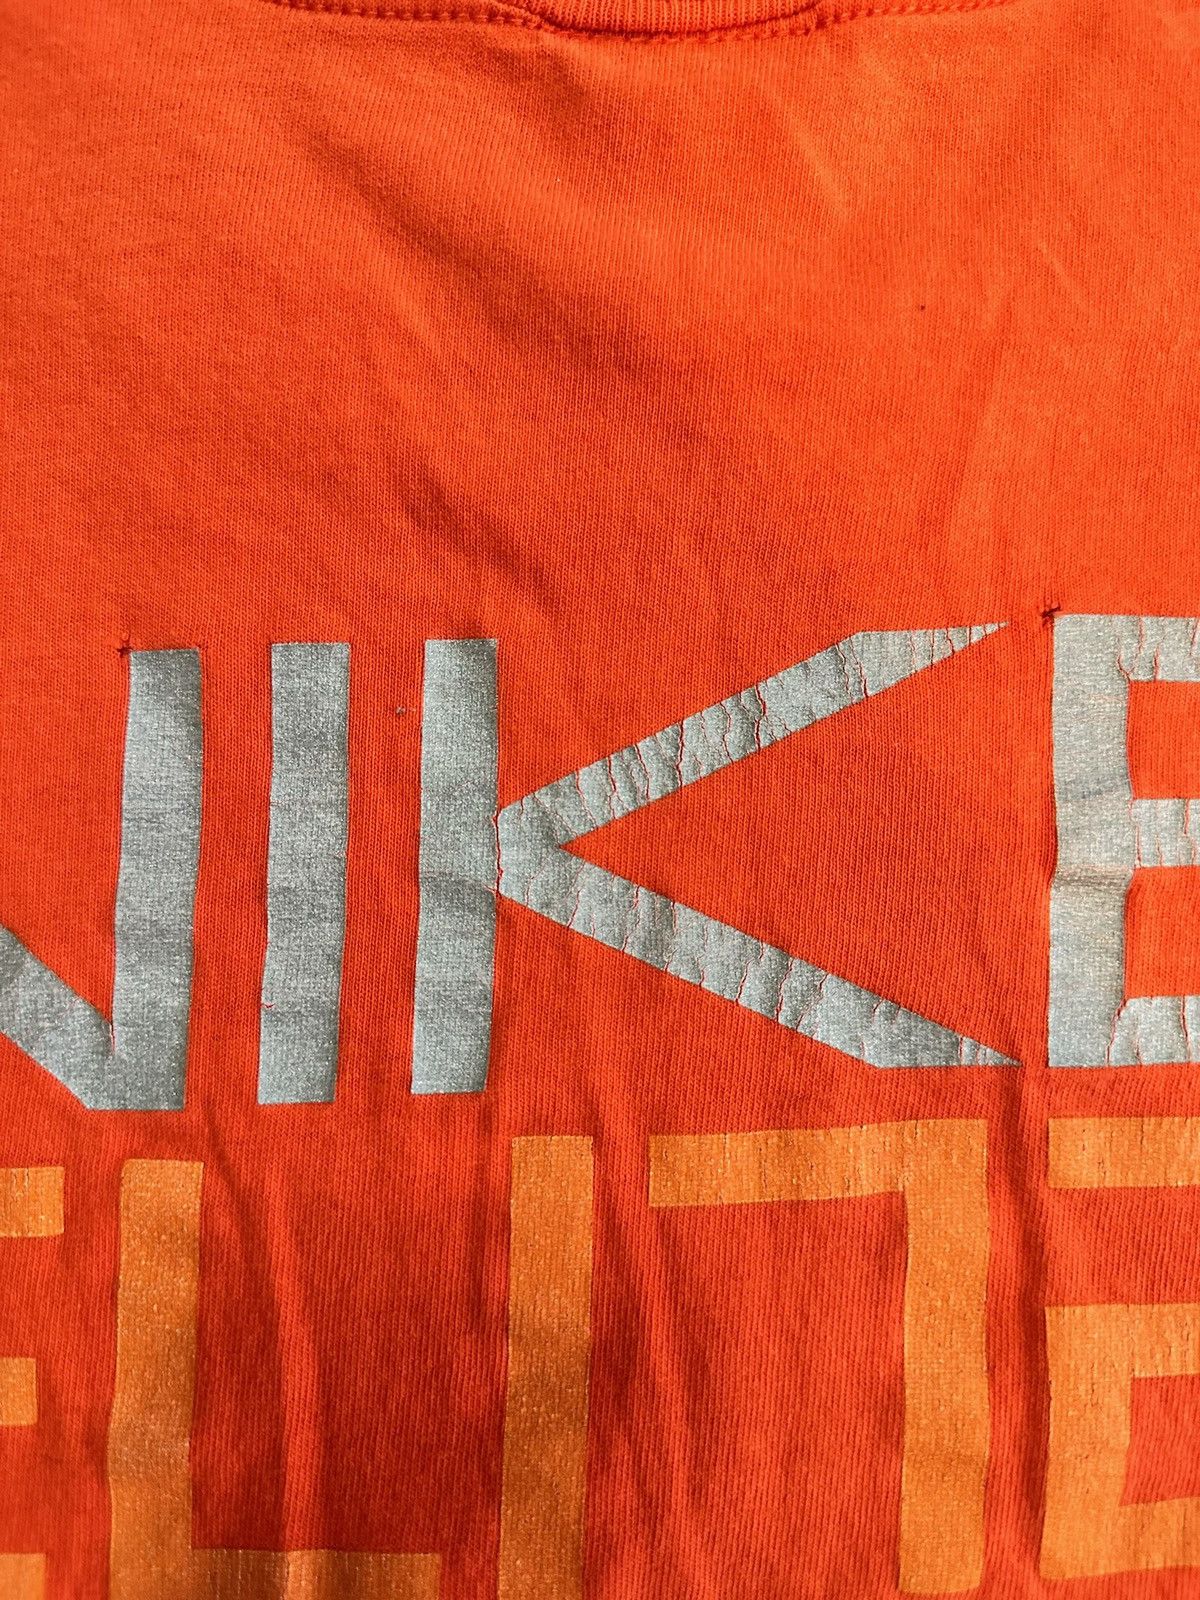 Nike Vintage Oklahoma State “Simply The Best” Tee Size US XXL / EU 58 / 5 - 5 Preview